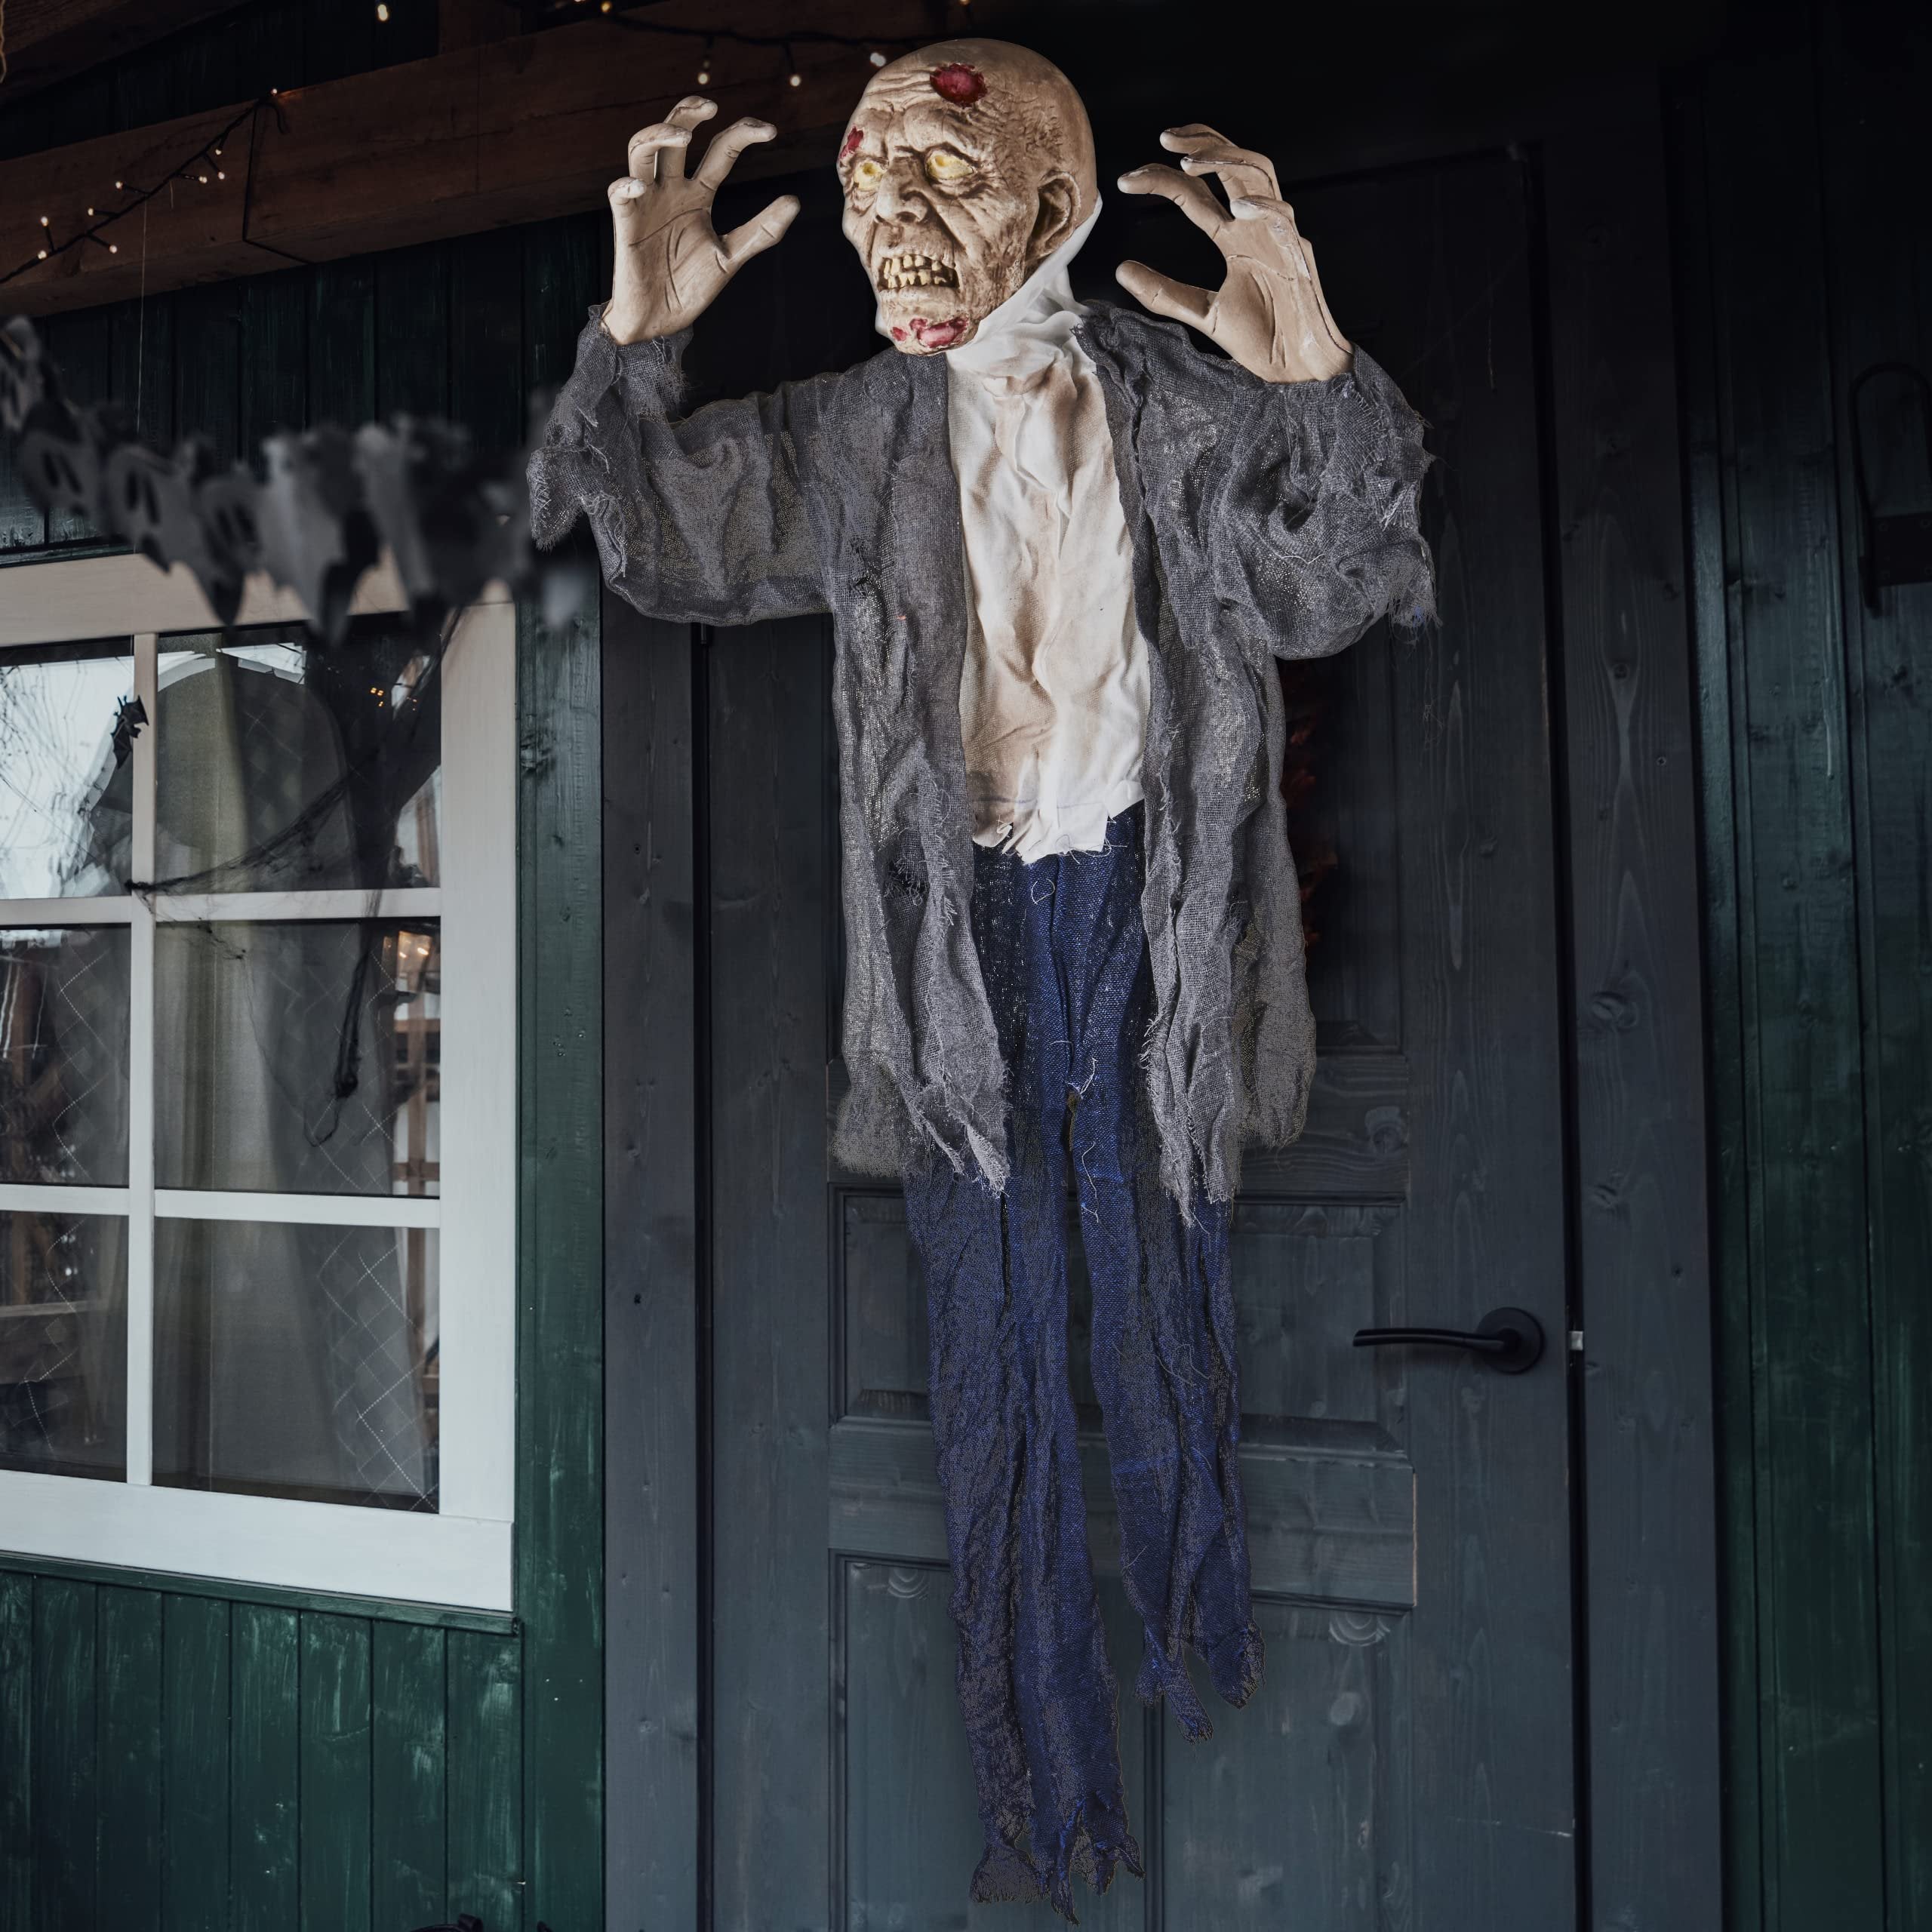 PREXTEX Halloween Hanging Zombie and Groundbreaker Decoration for The Best Halloween Decorations Zombie Outdoor Prop with Flowing Robe